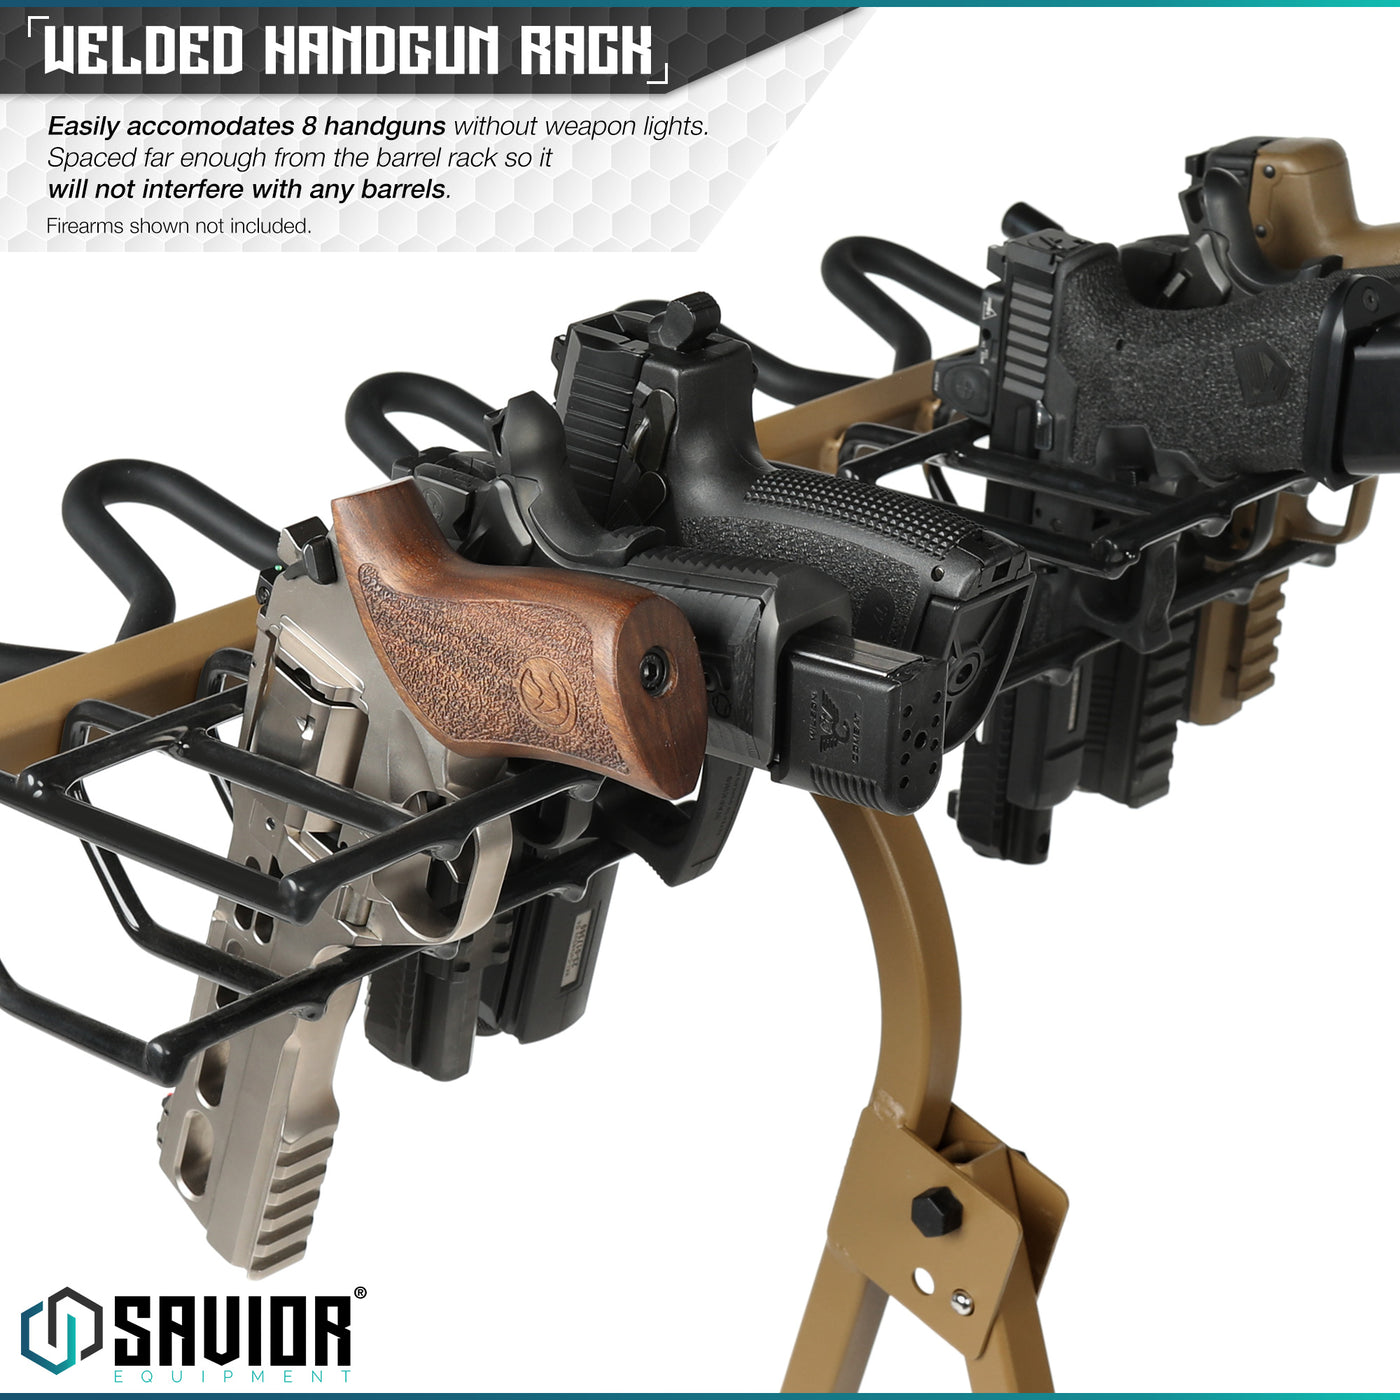 Welded Handgun Rack - Easily accommodates 8 handguns without weapon lights. Spaced far enough from the barrel rack so it will not interfere with any barrels. Firearms shown not included.